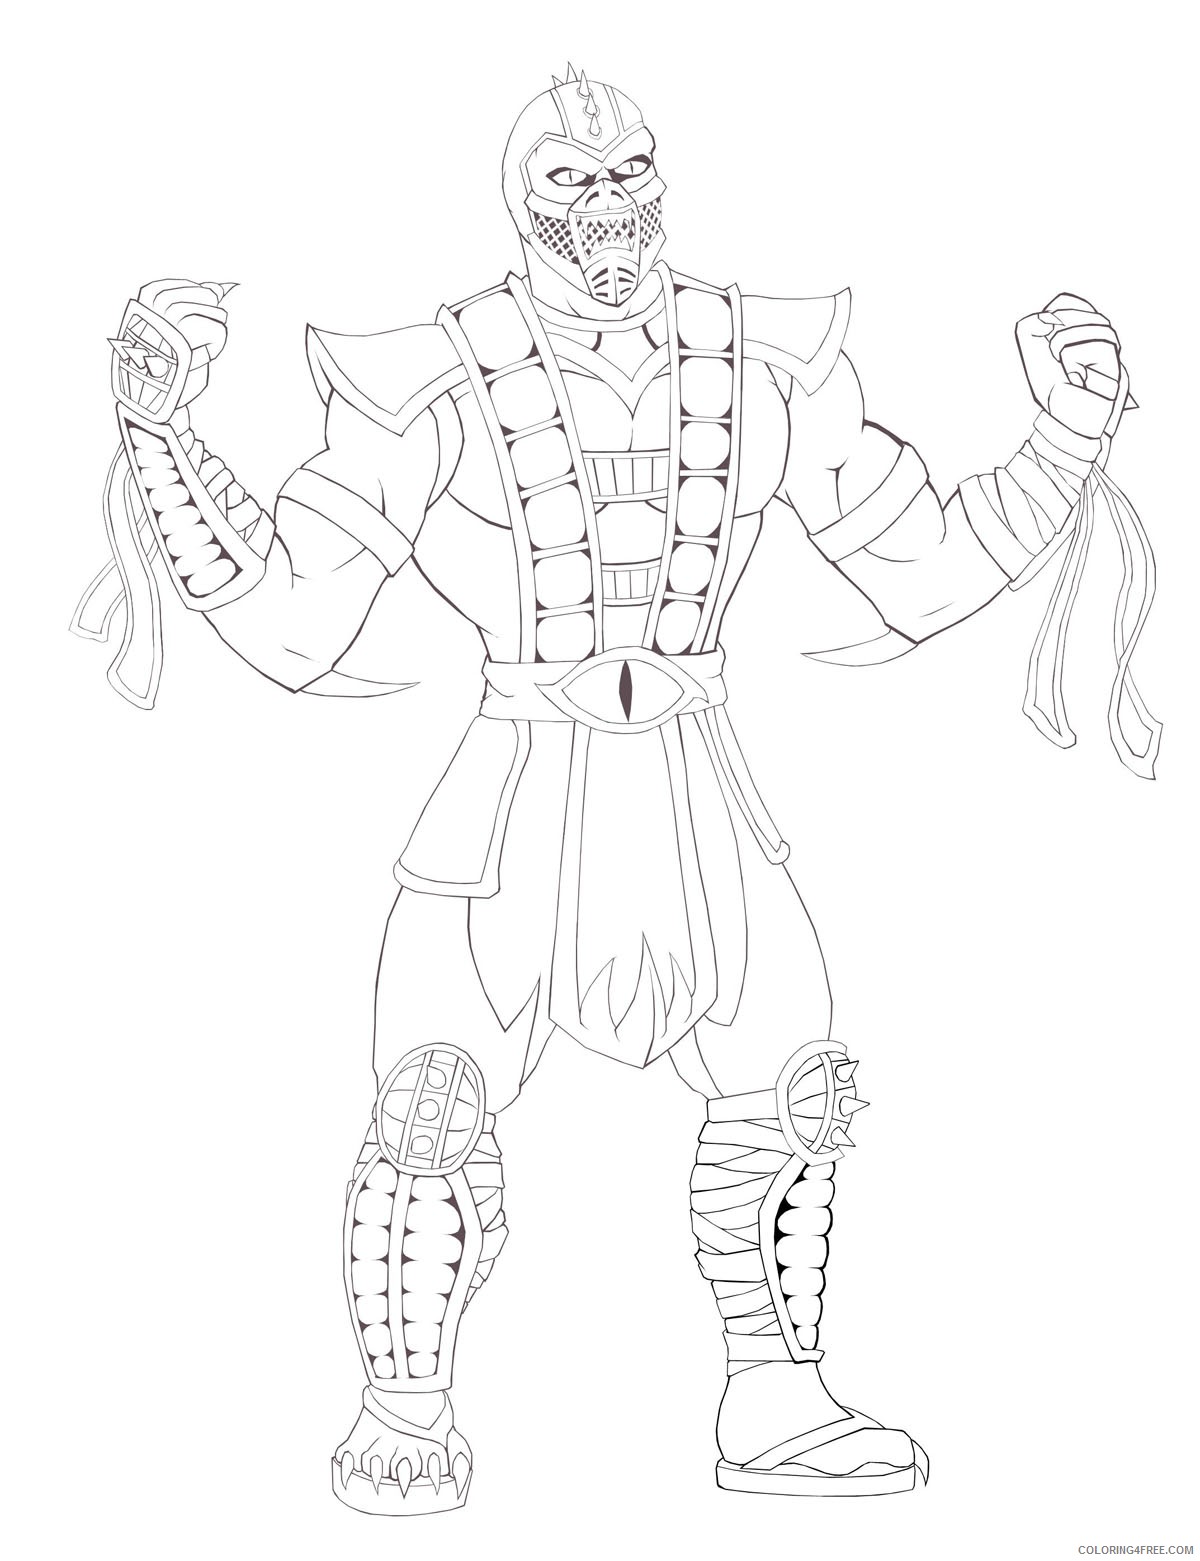 free mortal kombat coloring pages for kids Coloring4free